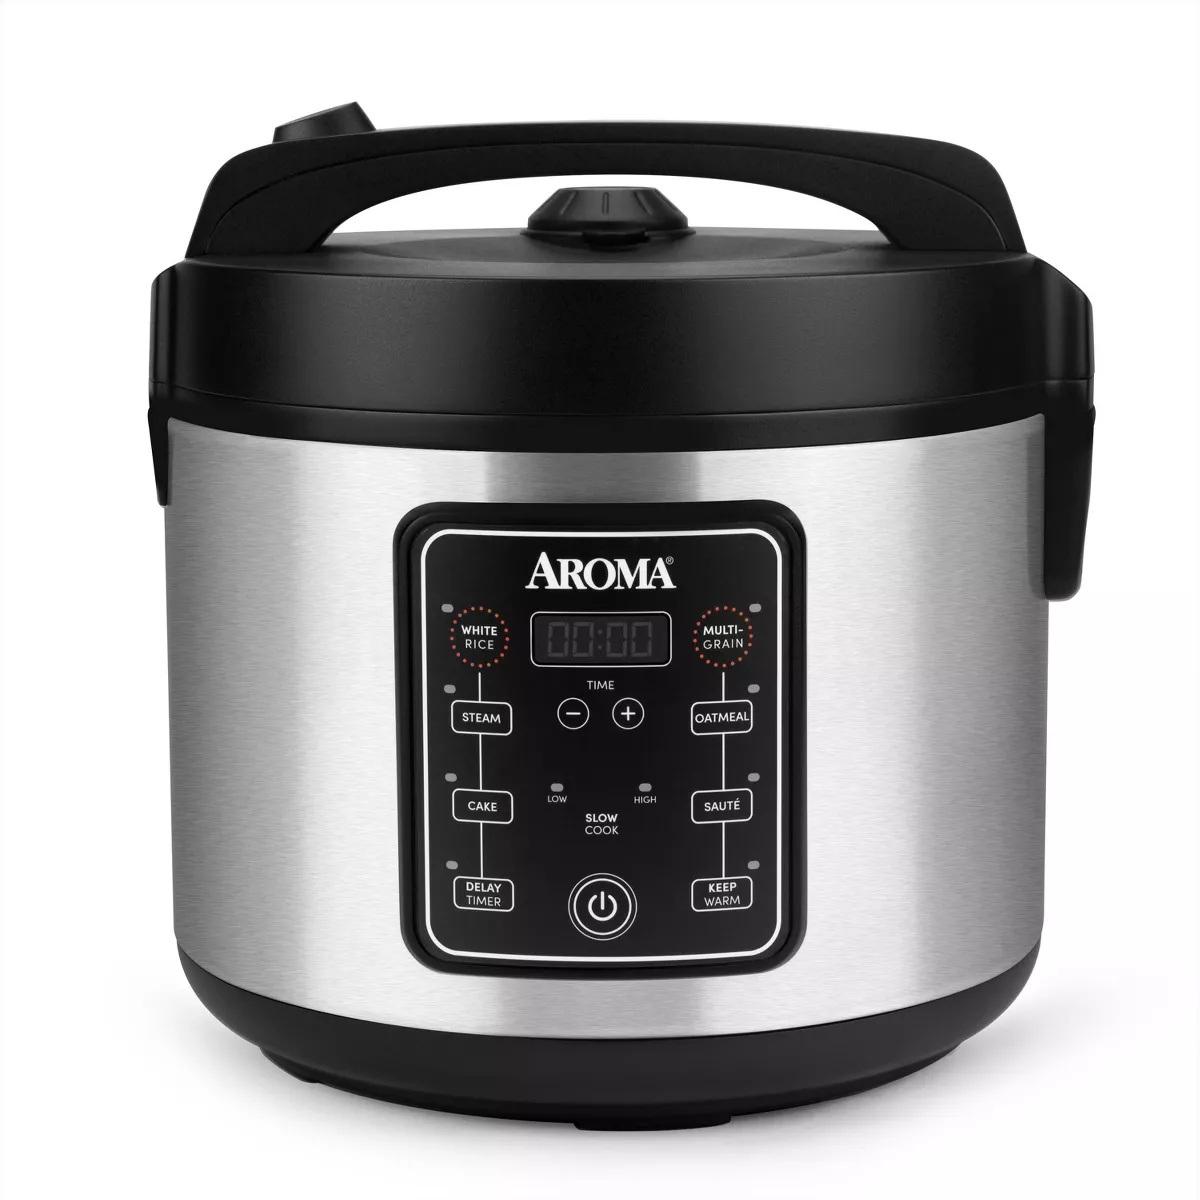 Aroma rice cooker with digital controls.